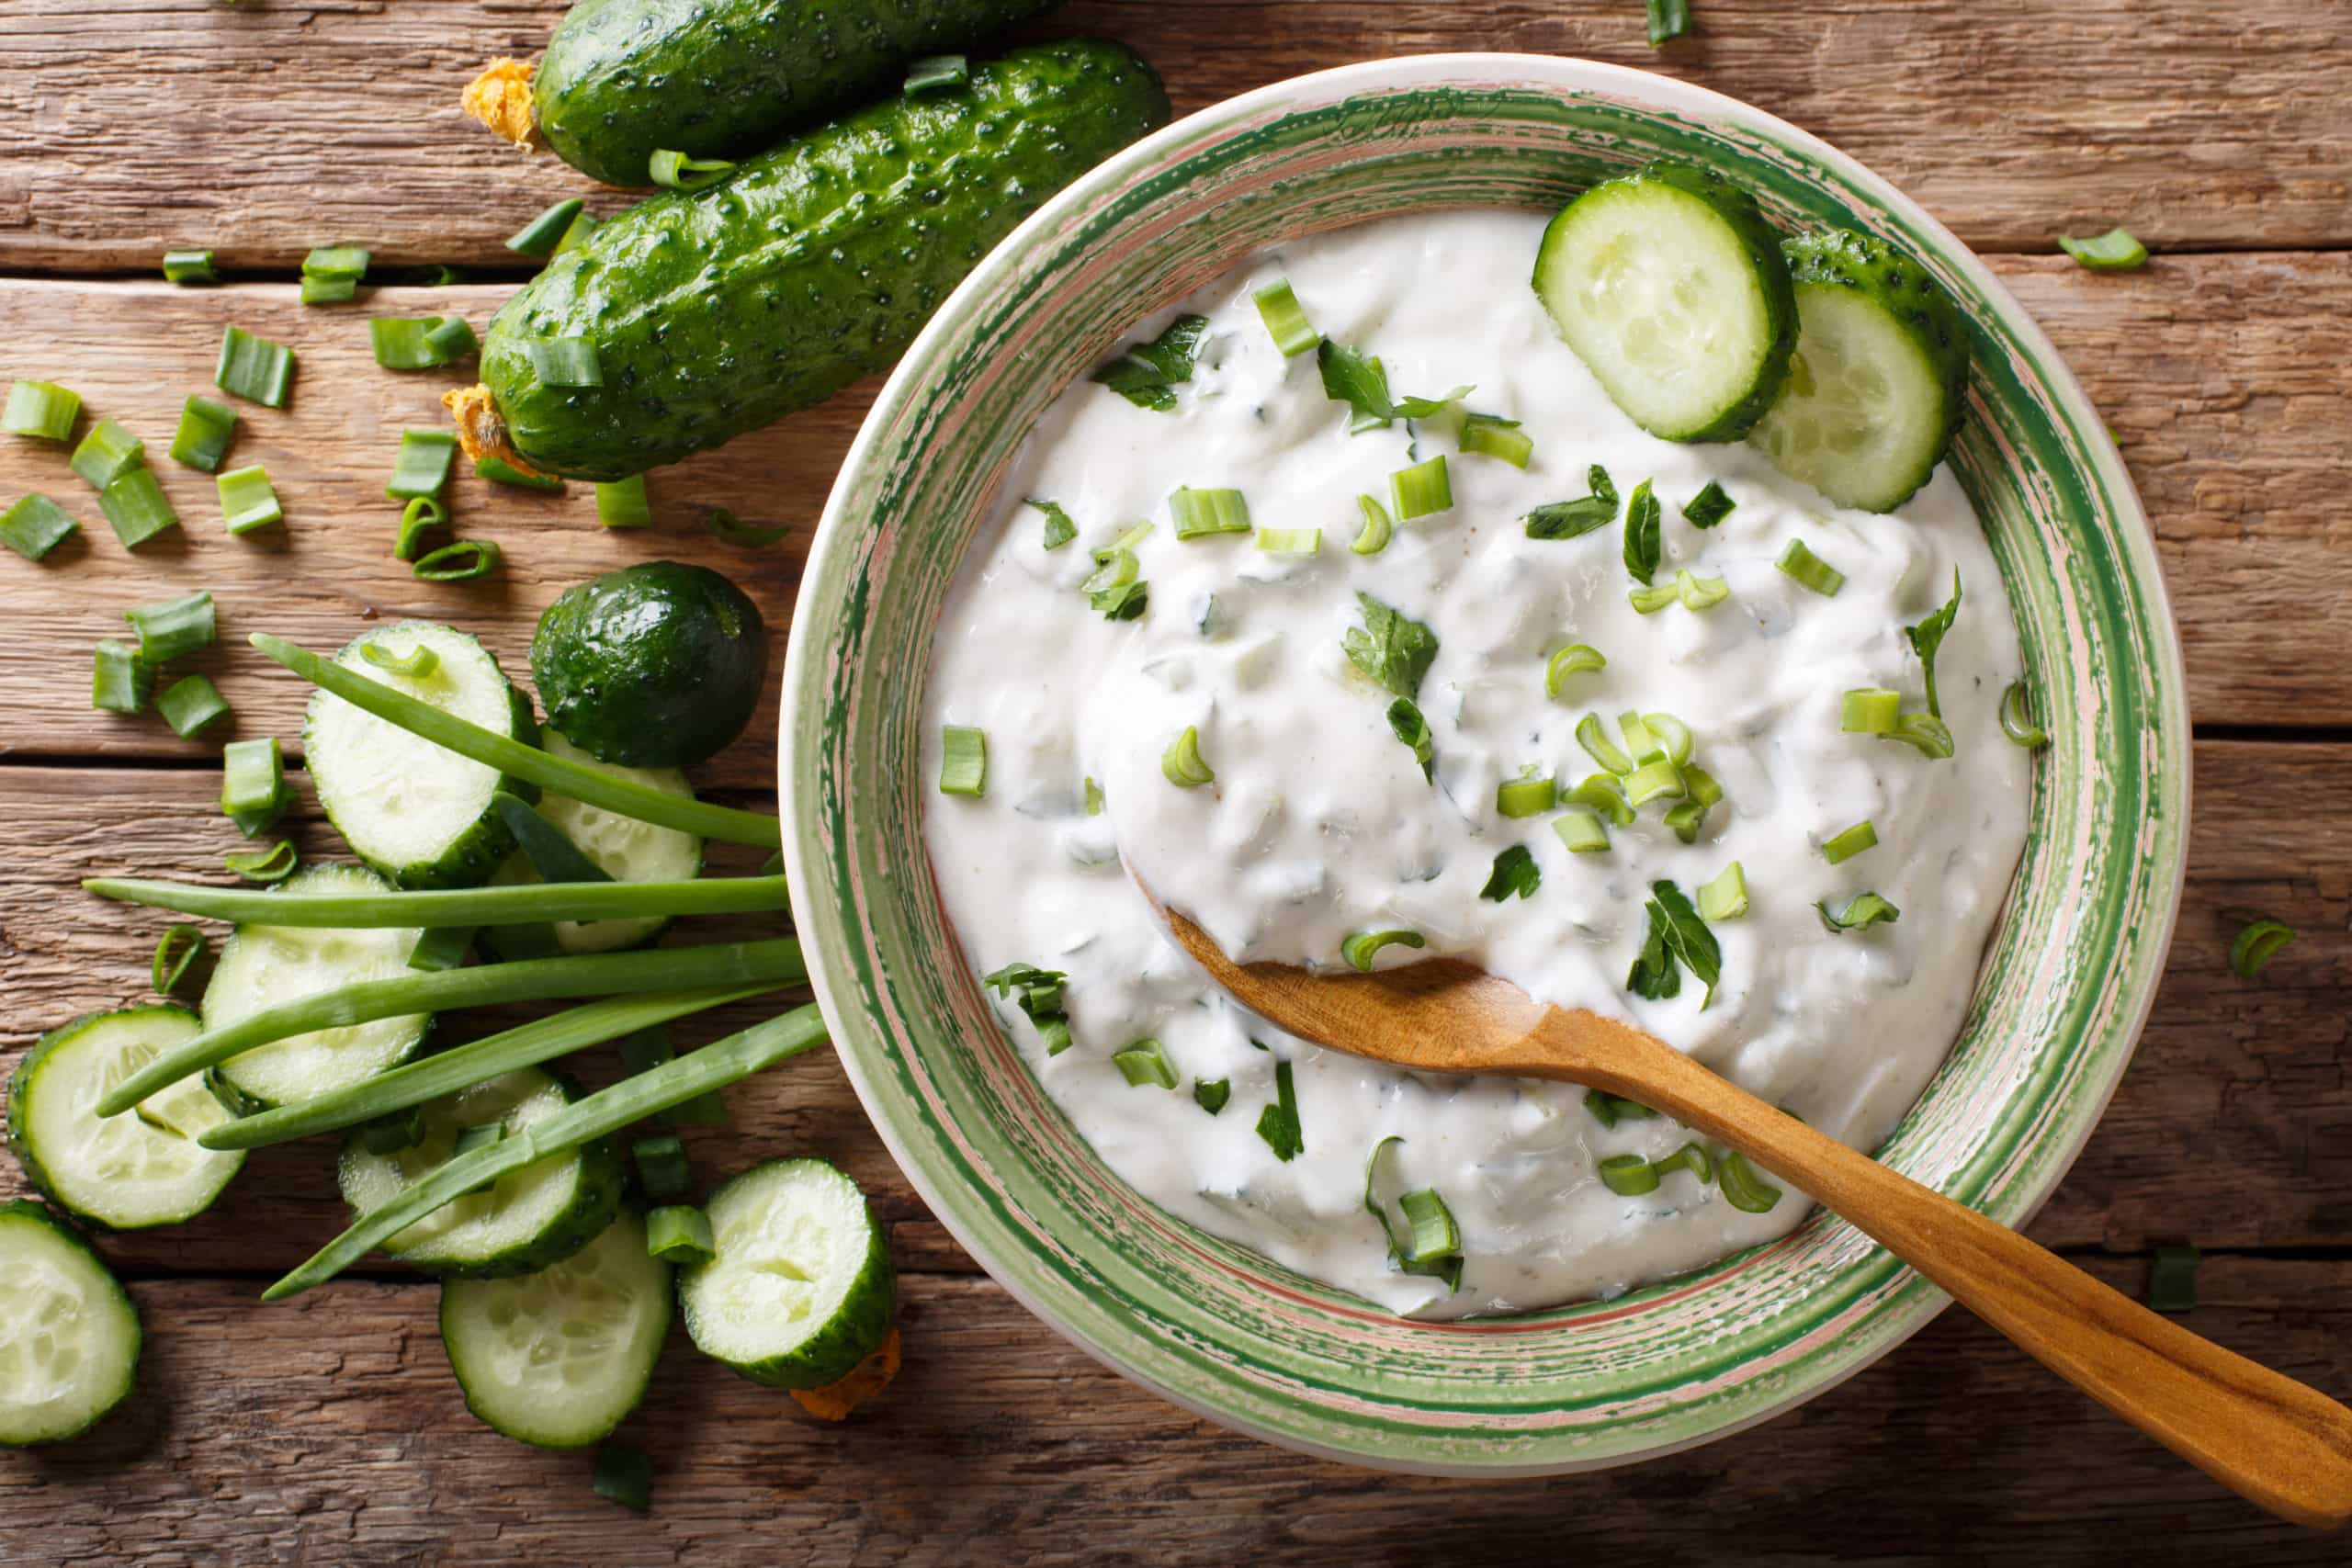 Yogurt-based condiment with herbs, spices and cucumber close-up in a bowl on a table. Horizontal top view from above.